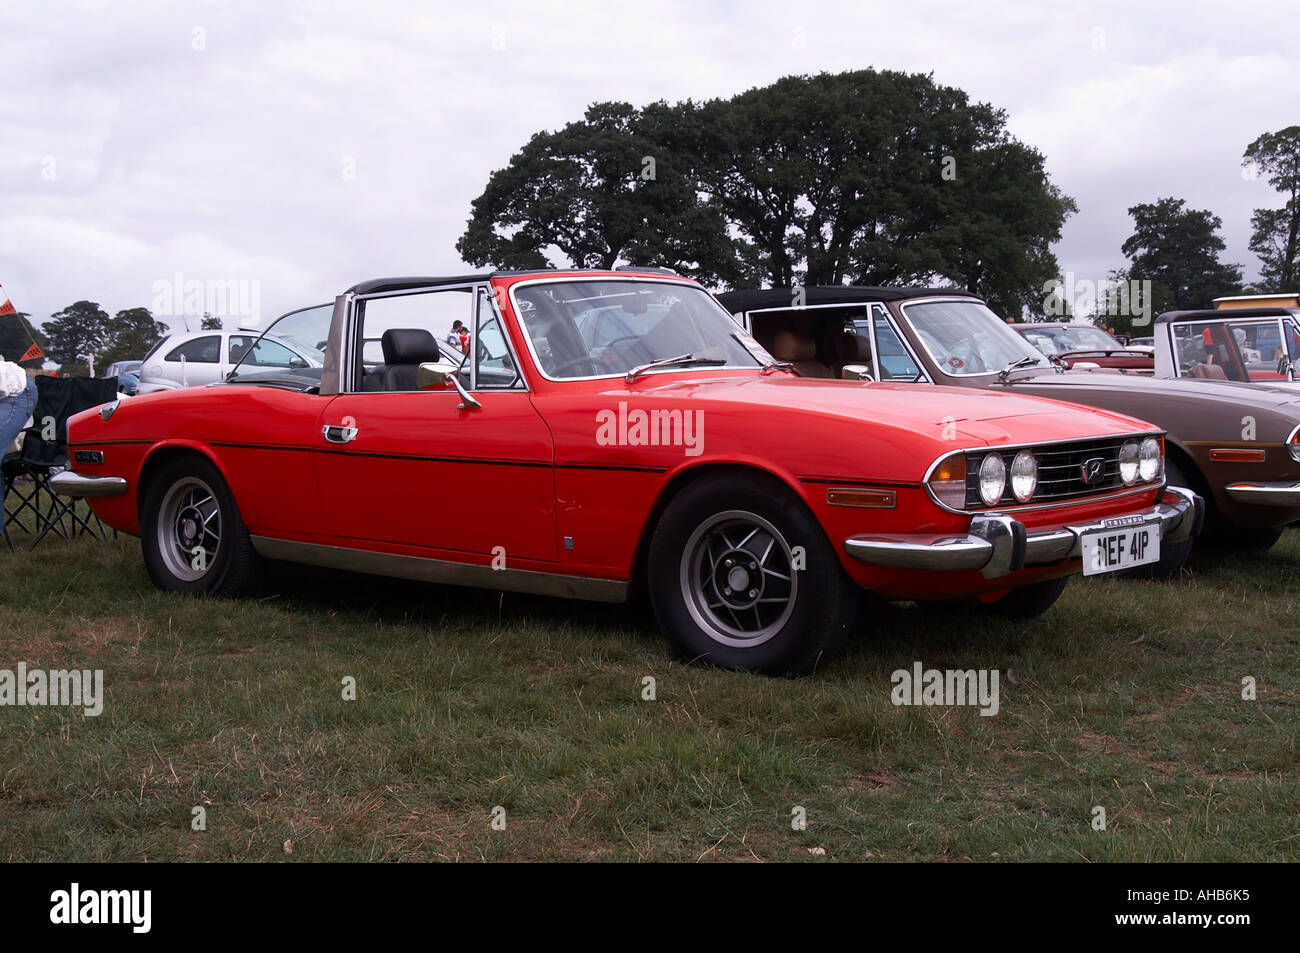 Triumph, stag, classic, sports, car, British, Leyland, 1970's, 70's, nineteen, seventies, Stock Photo